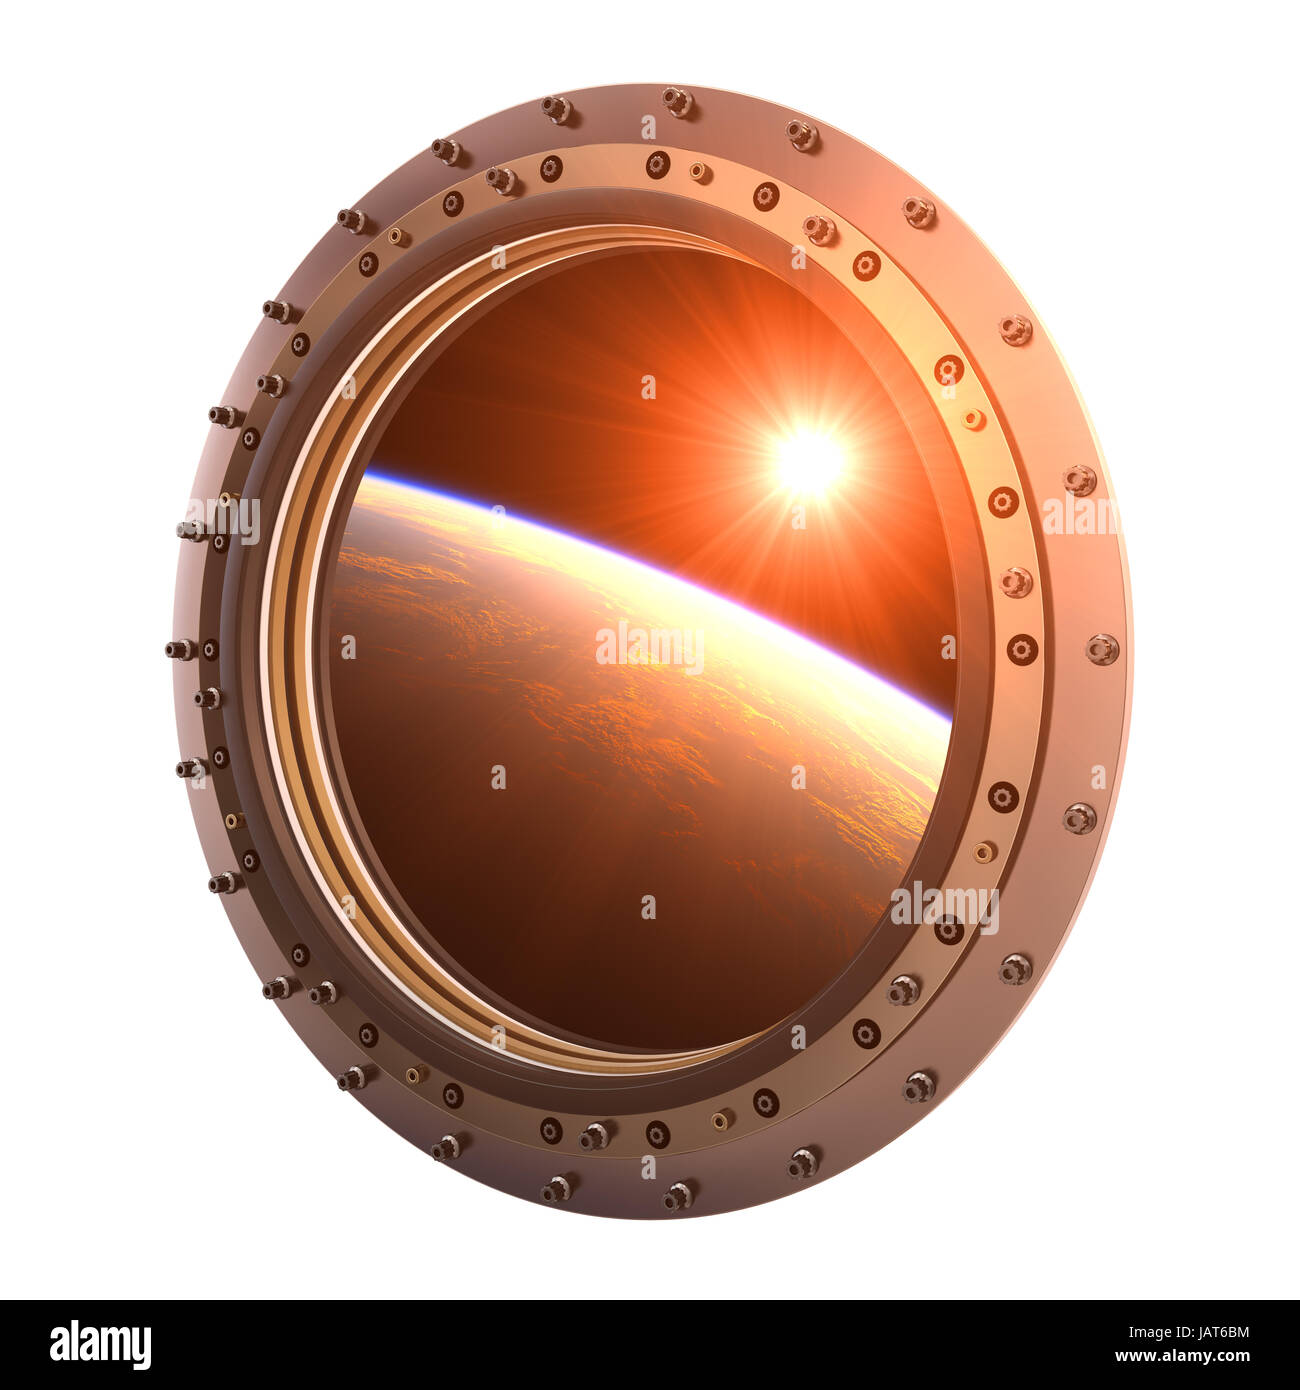 View On The Planet And Sun Through The Porthole Of Spaceship. 3D Illustration. Stock Photo